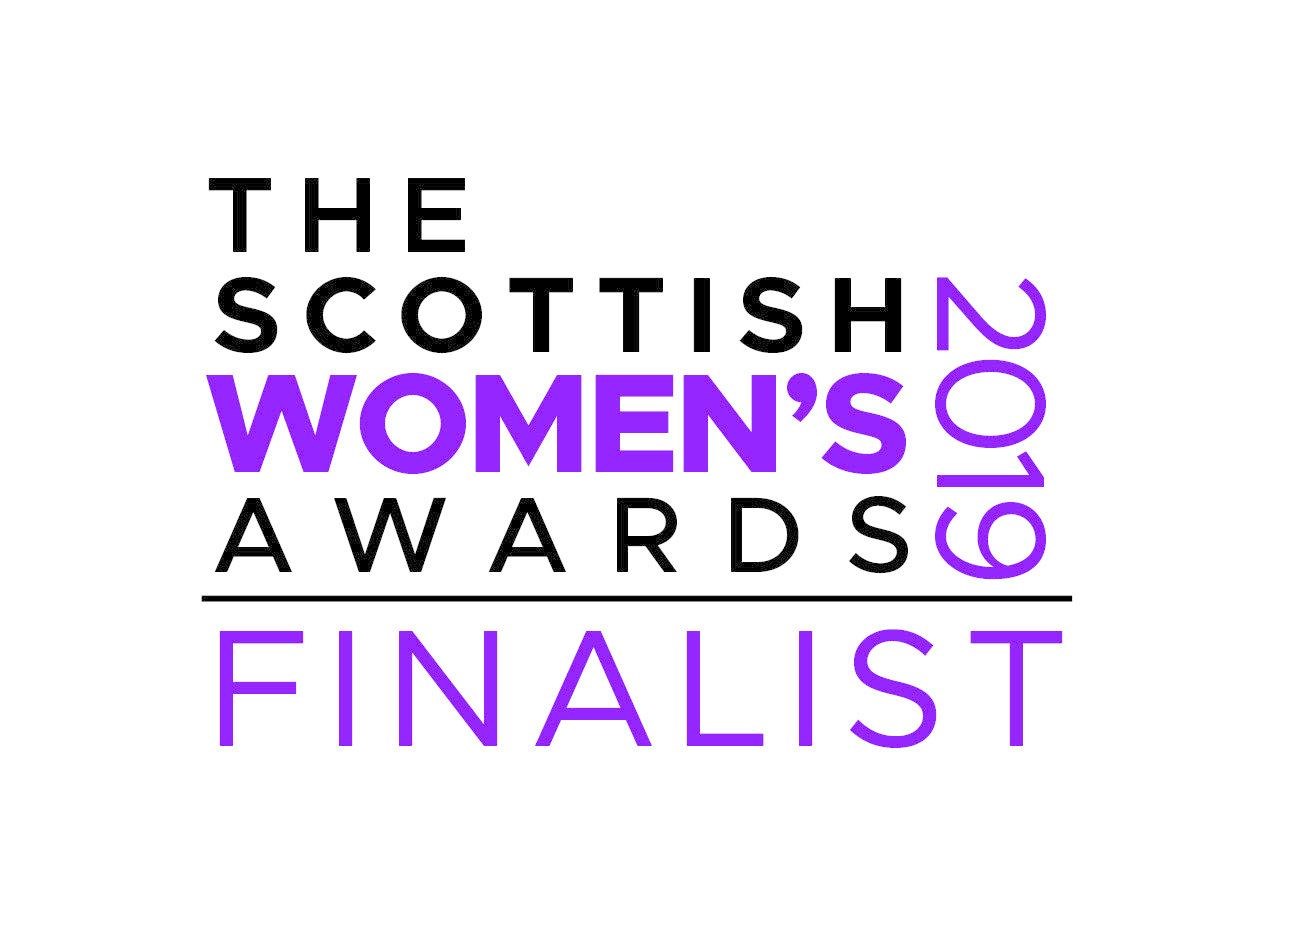 The Scottish Women's Awards 2019 take place in Glasgow later this month.